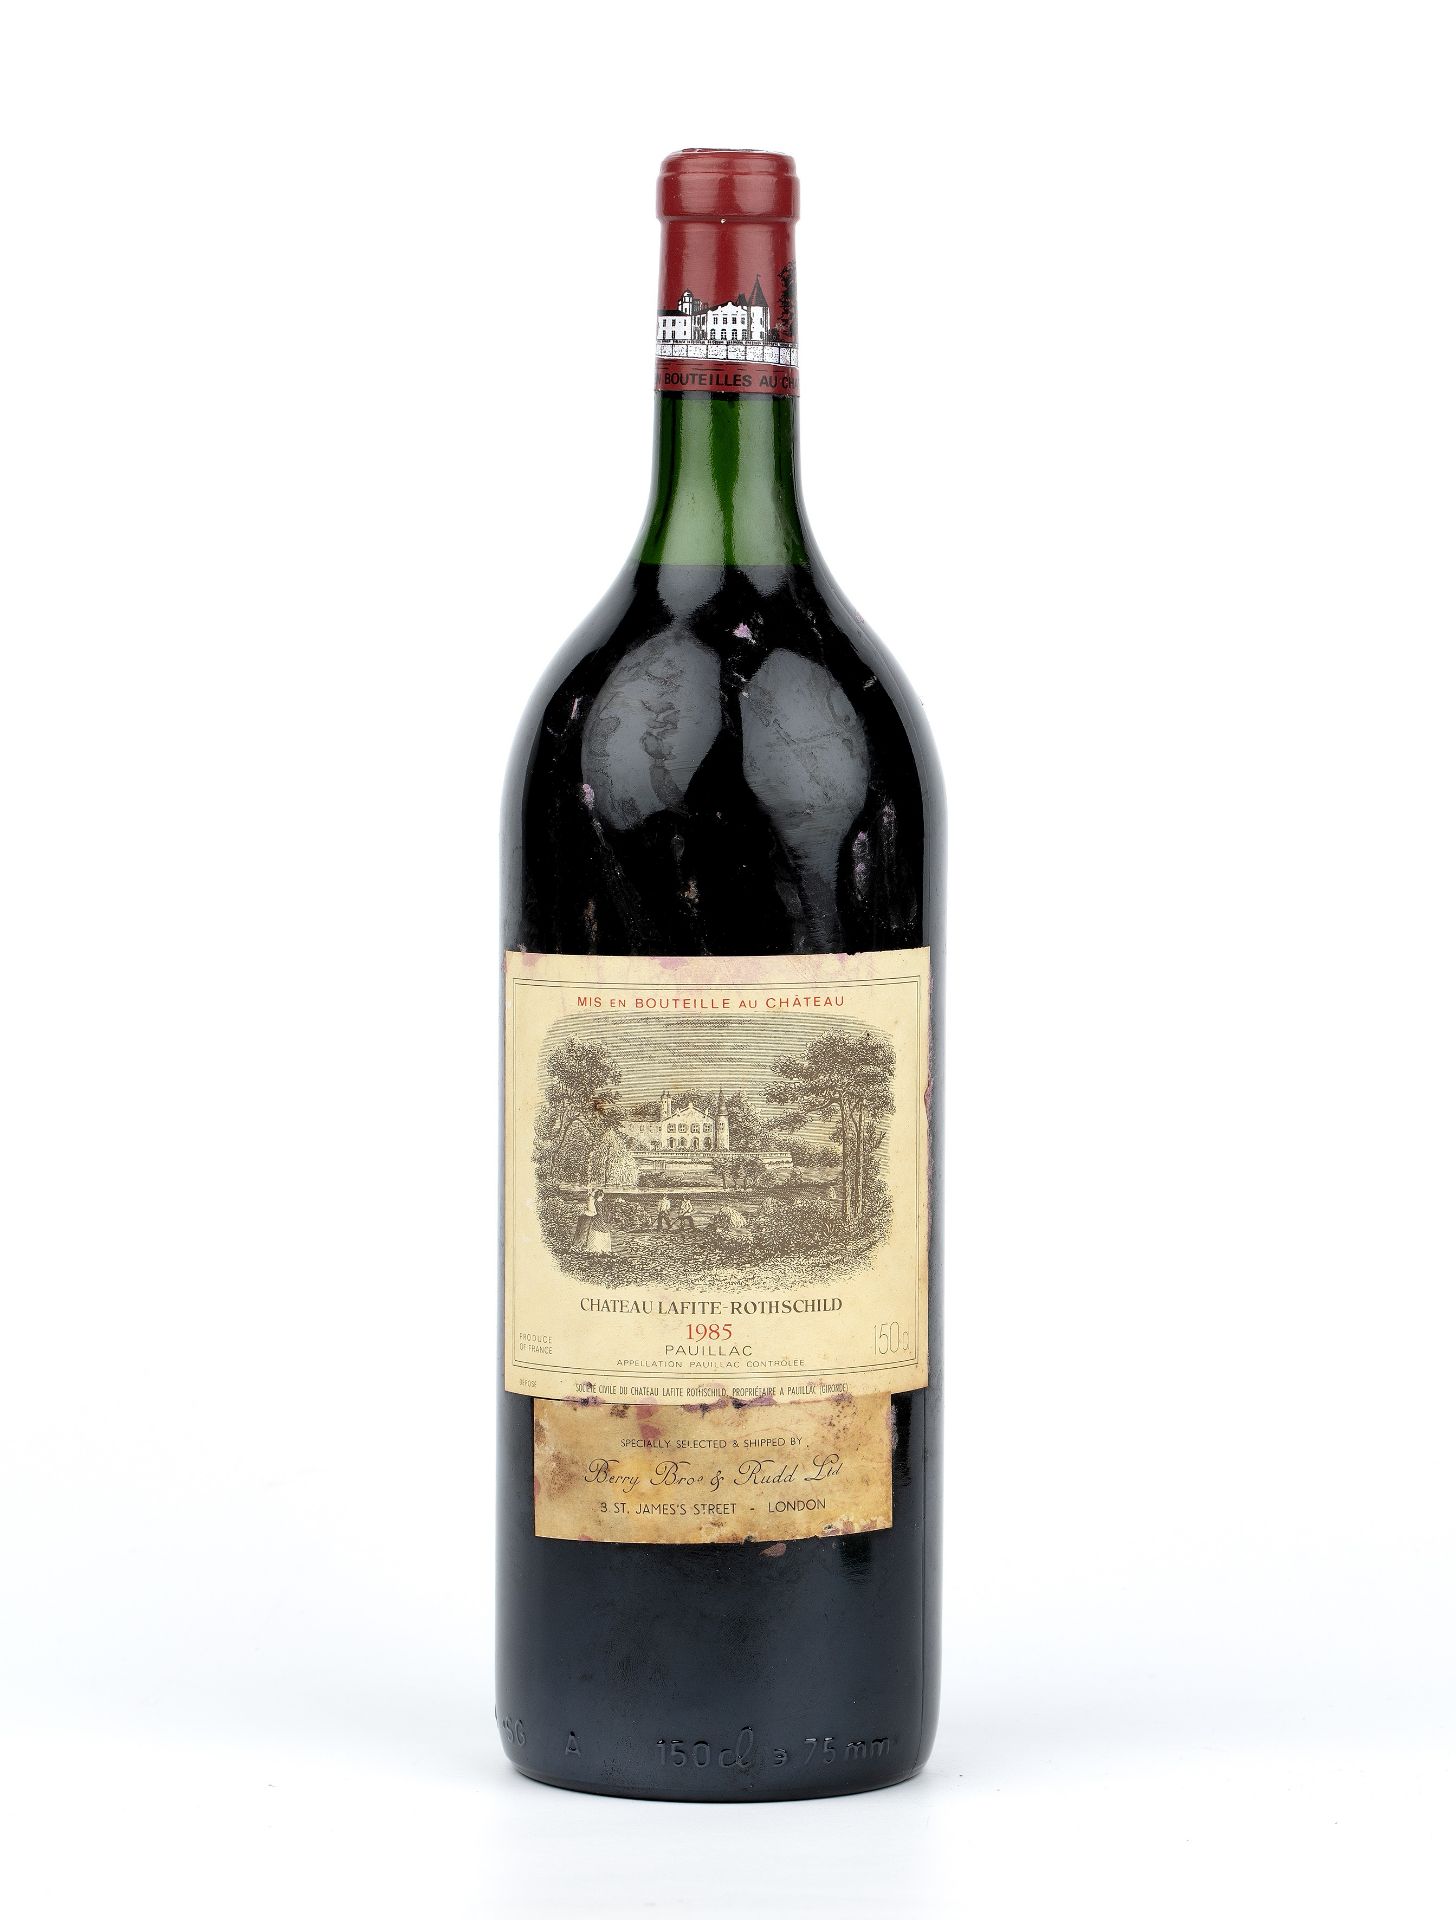 A magnum 150cl bottle of Château Lafite-Rothschild 1985, Pauillac , retailed by Berry Bros & Rudd